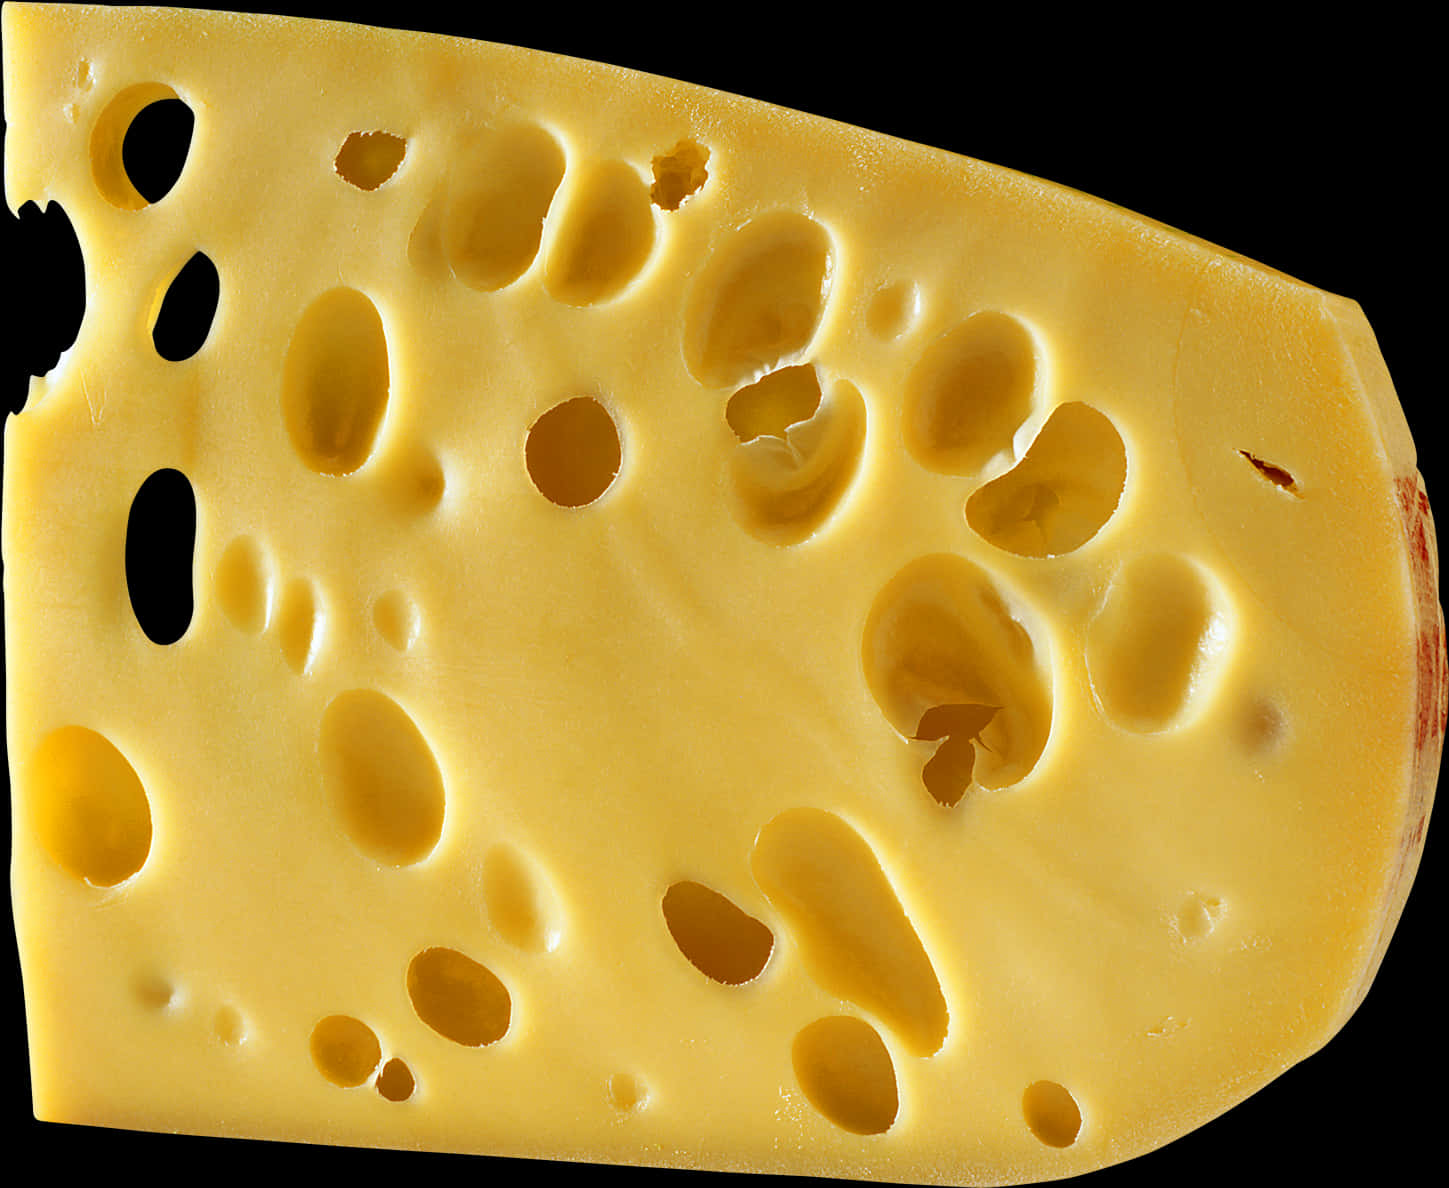 A Piece Of Cheese With Holes